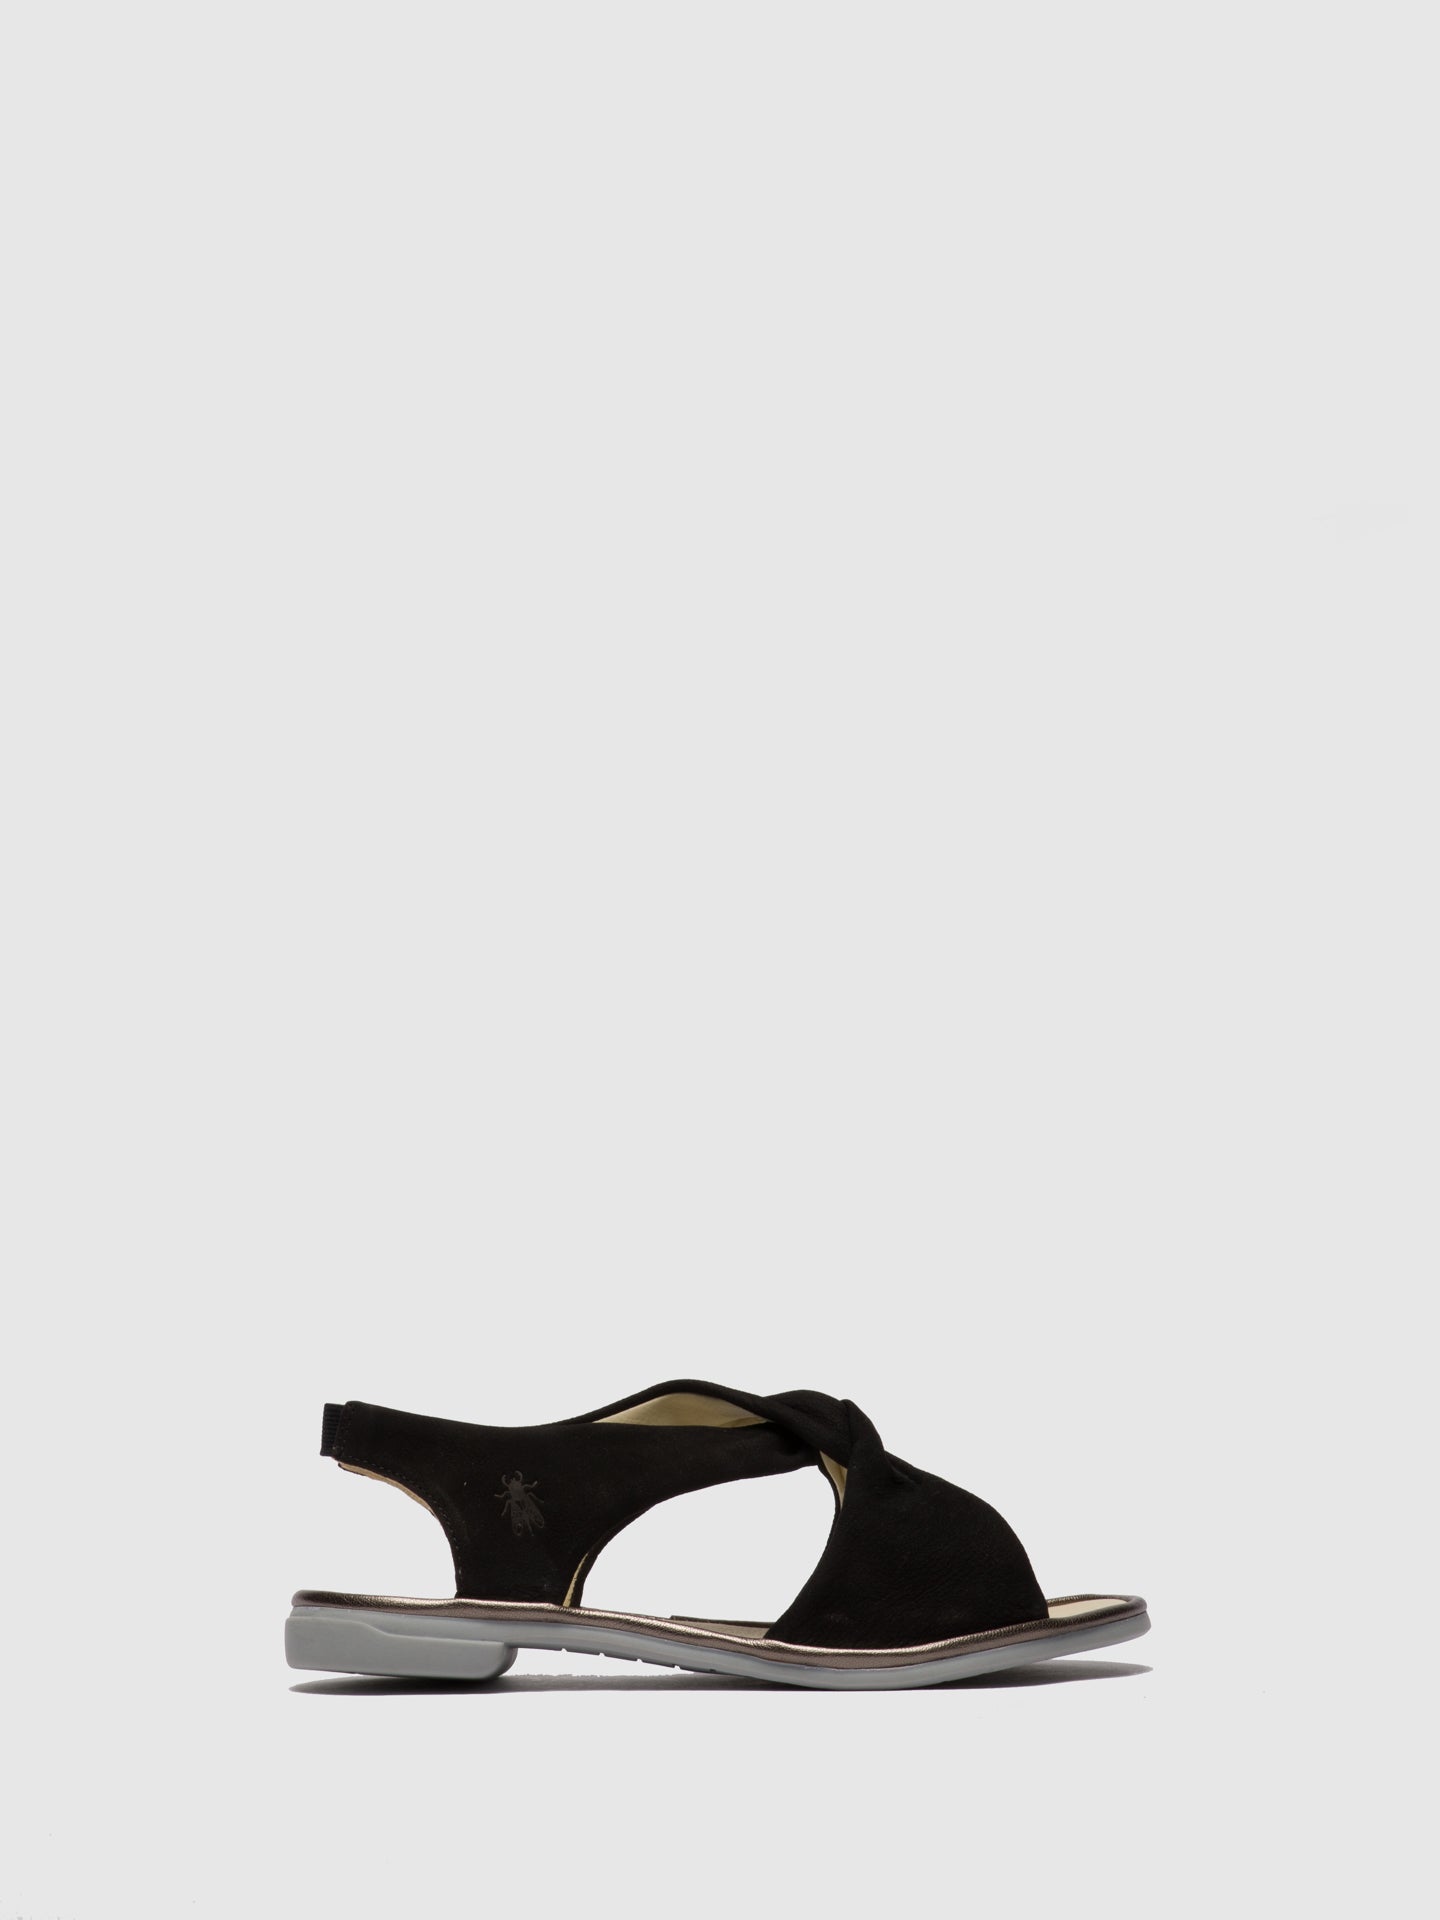 Fly London Crossover Sandals CABI168FLY Black